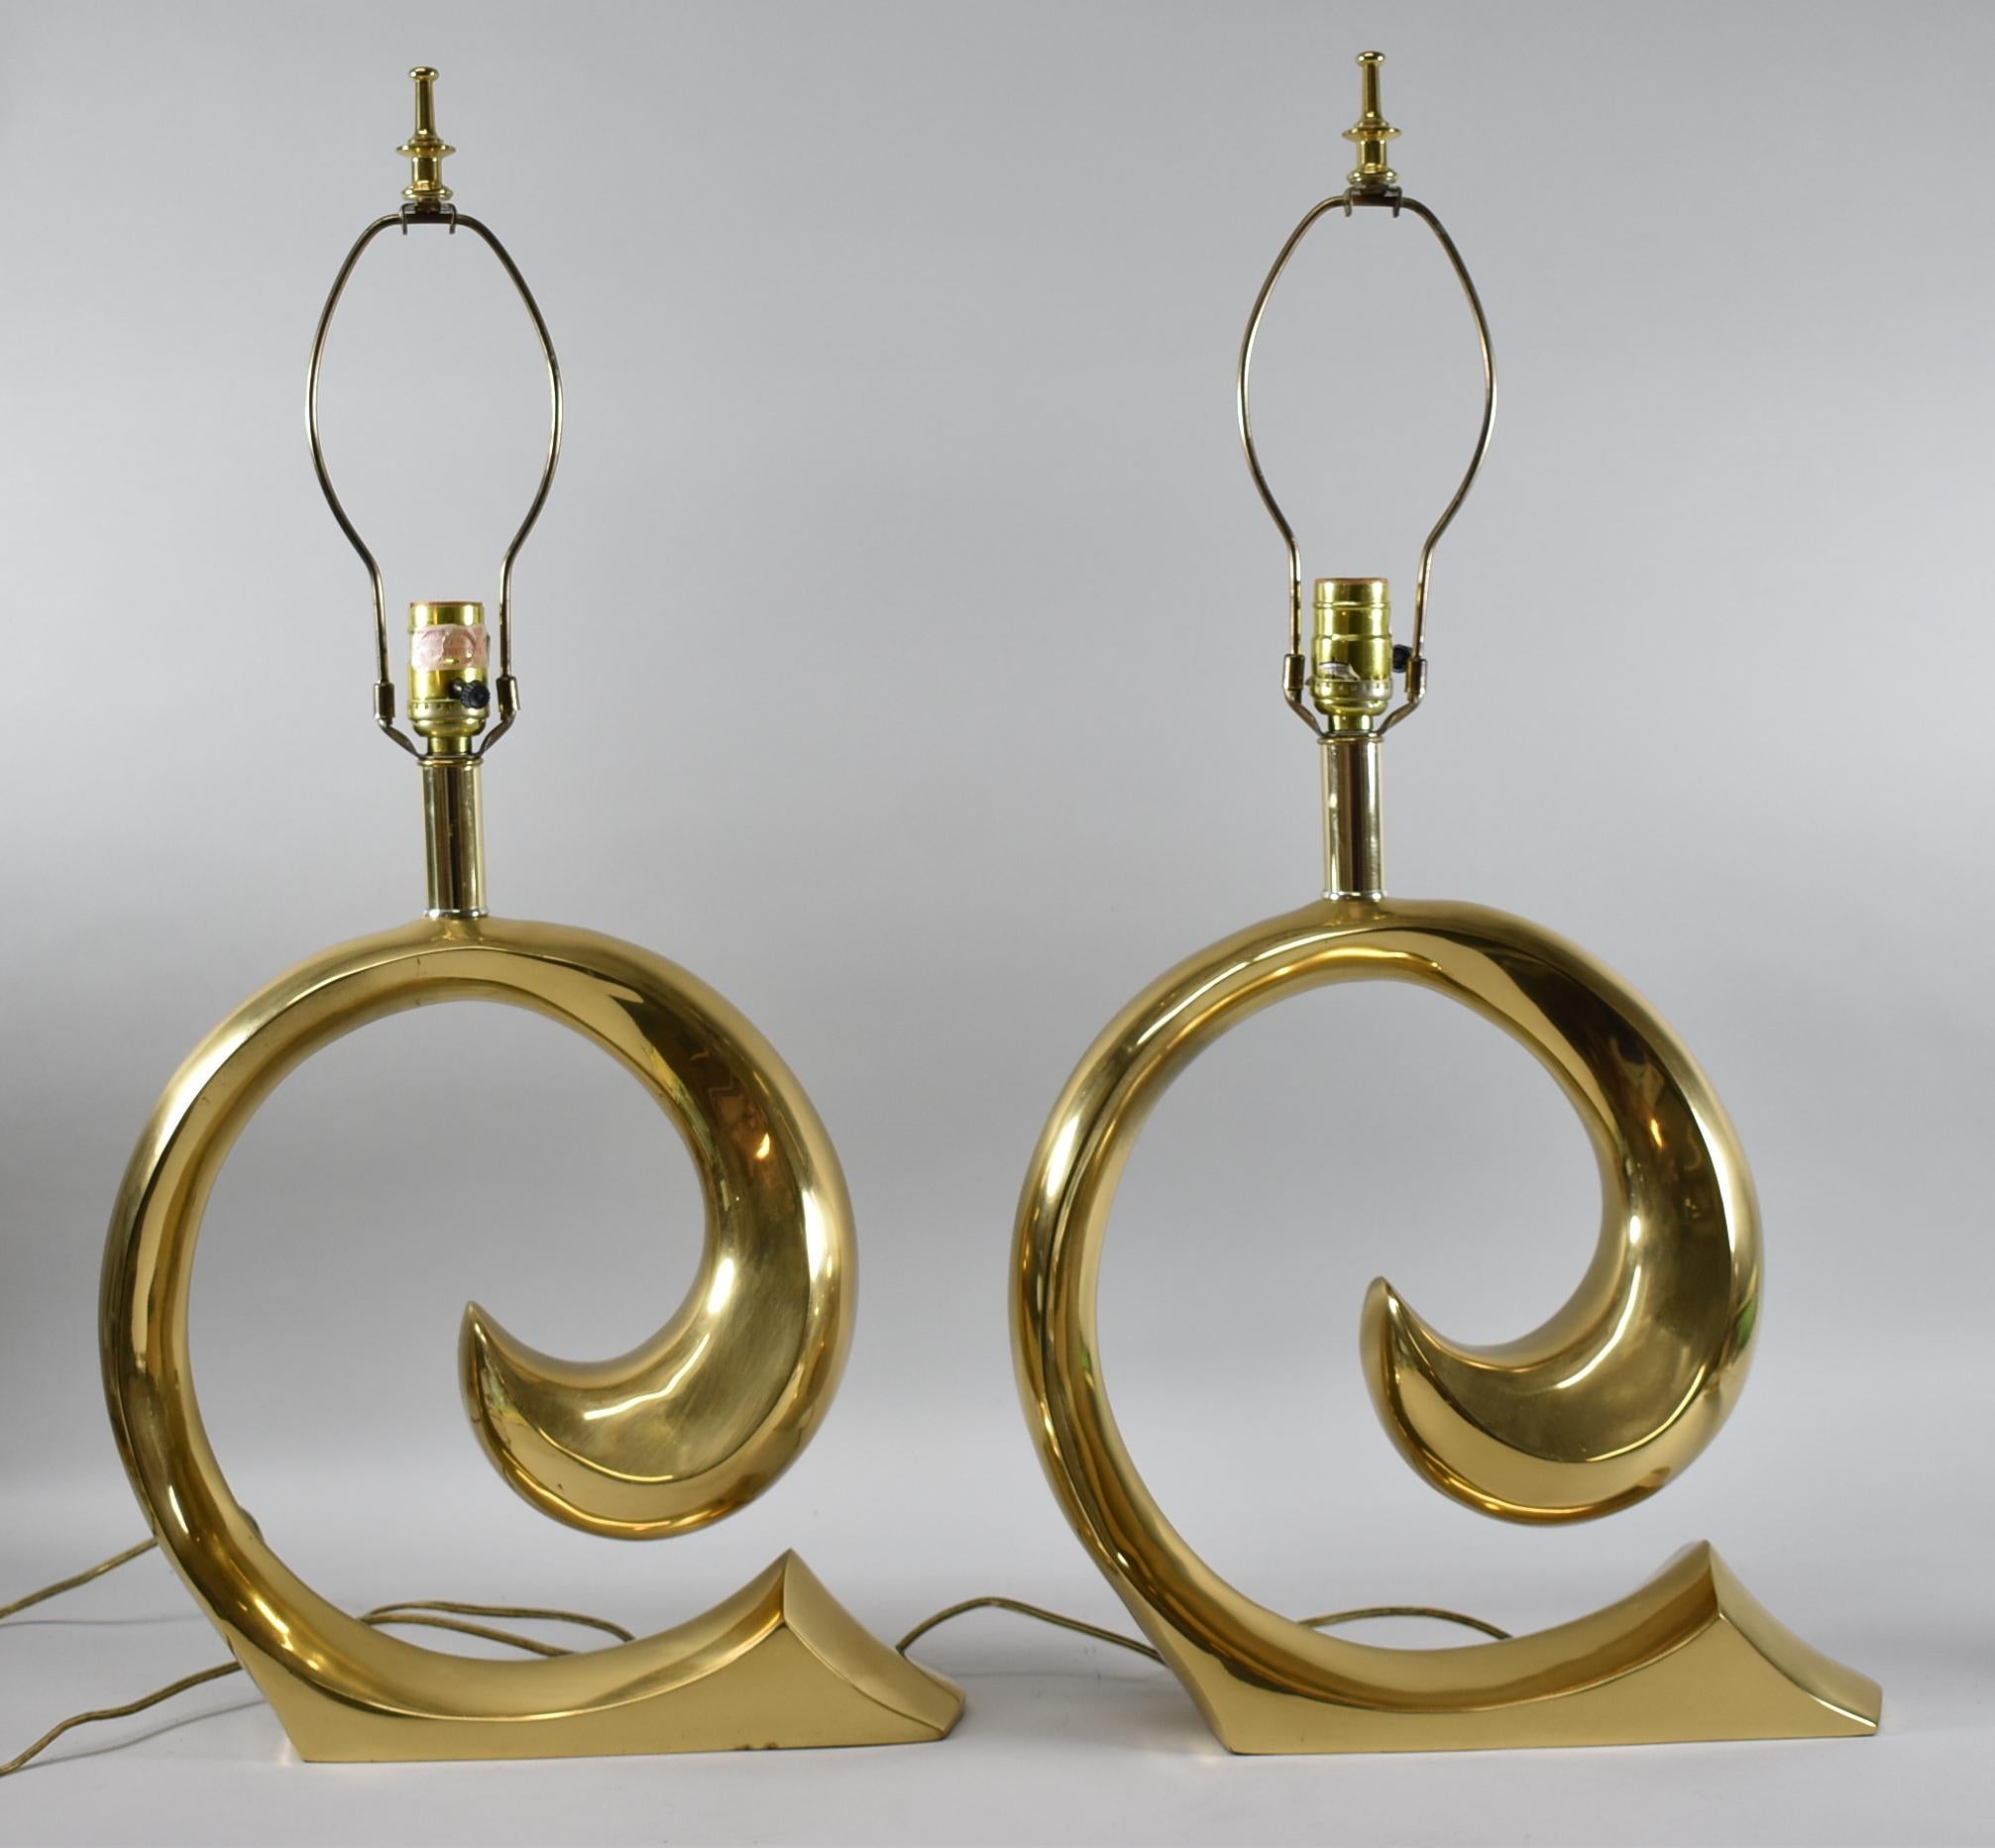 Hollywood Regency pair of lamps by Erwin Lambeth for Pierre Cardin. Curling wave form 